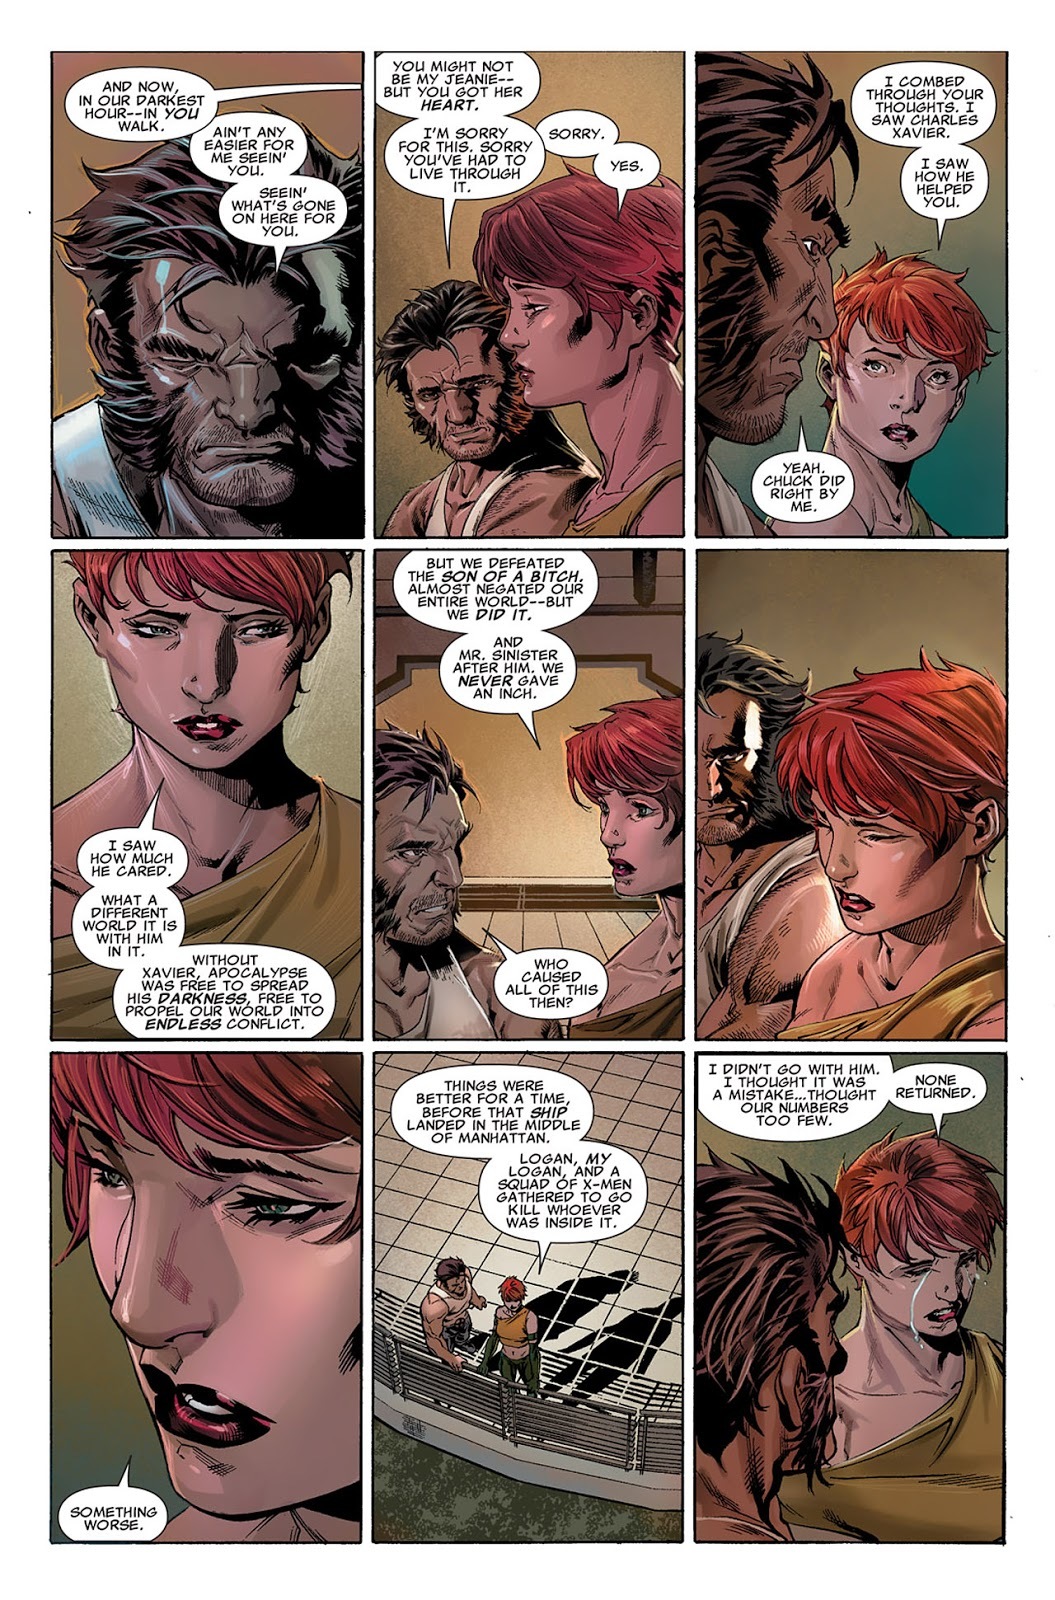 Jean combs through Wolverines memories to see what the 616 reality is like. (Uncanny X-Force vol 1 #12)